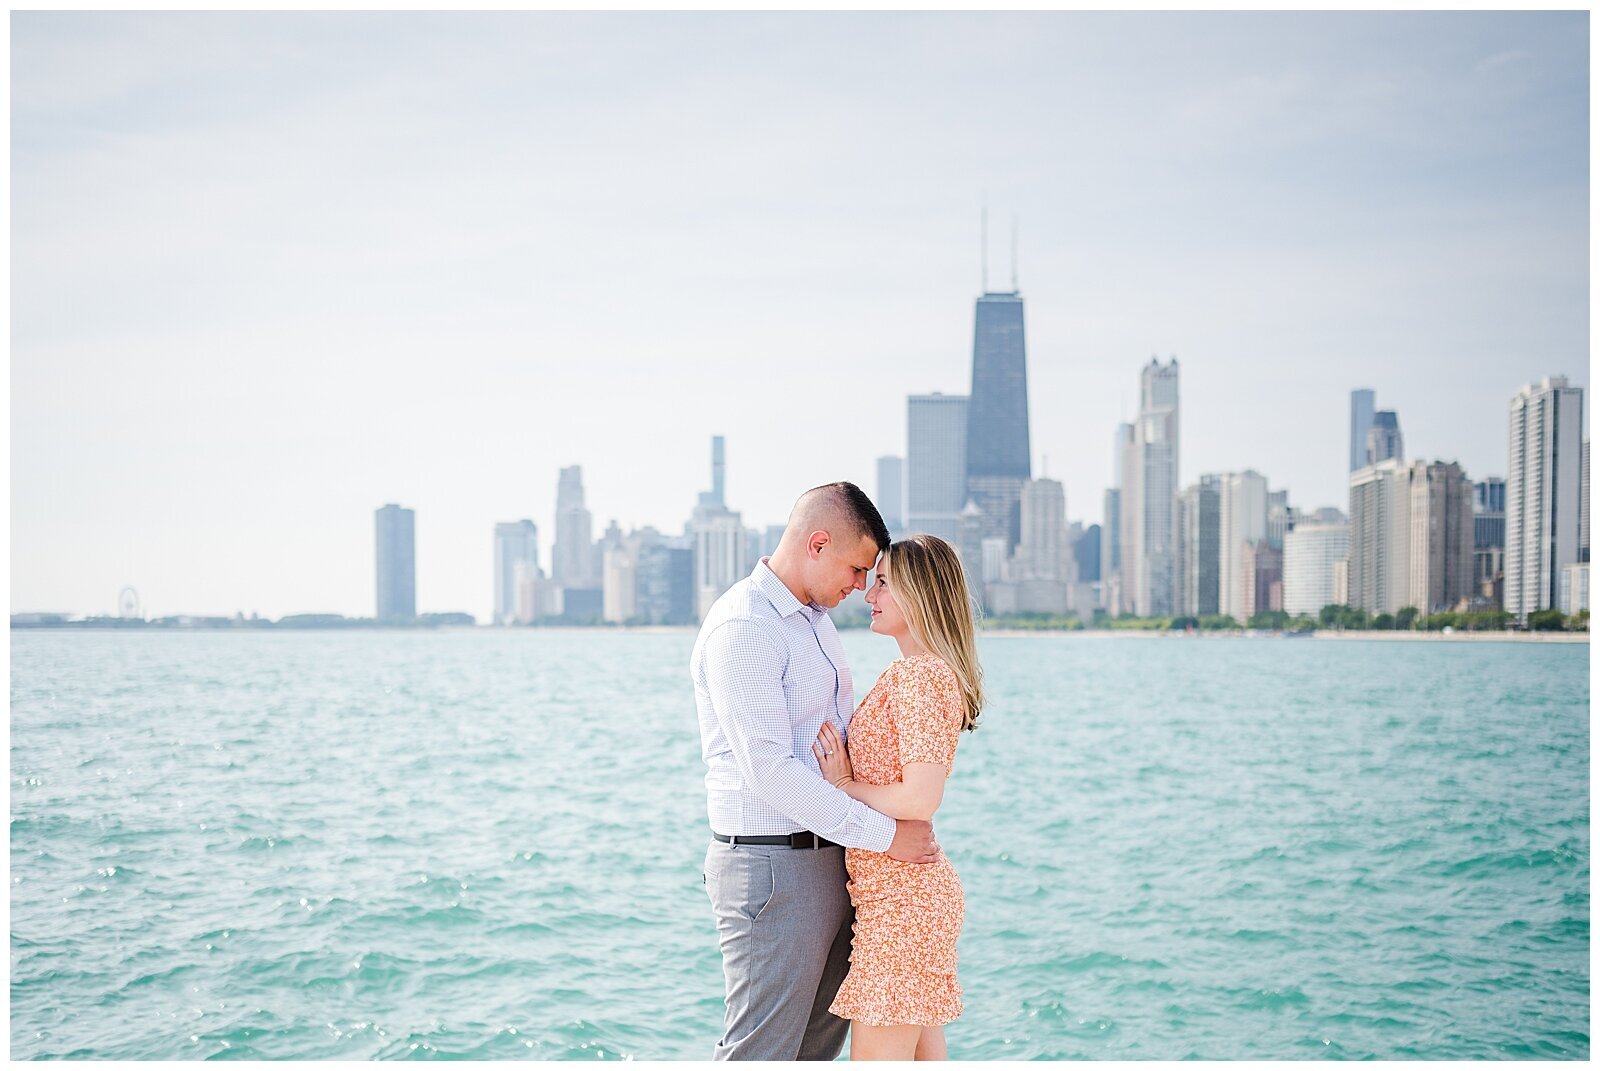 Bright and airy engagement portrait at North ave beach overlooking the Chicago skyline.